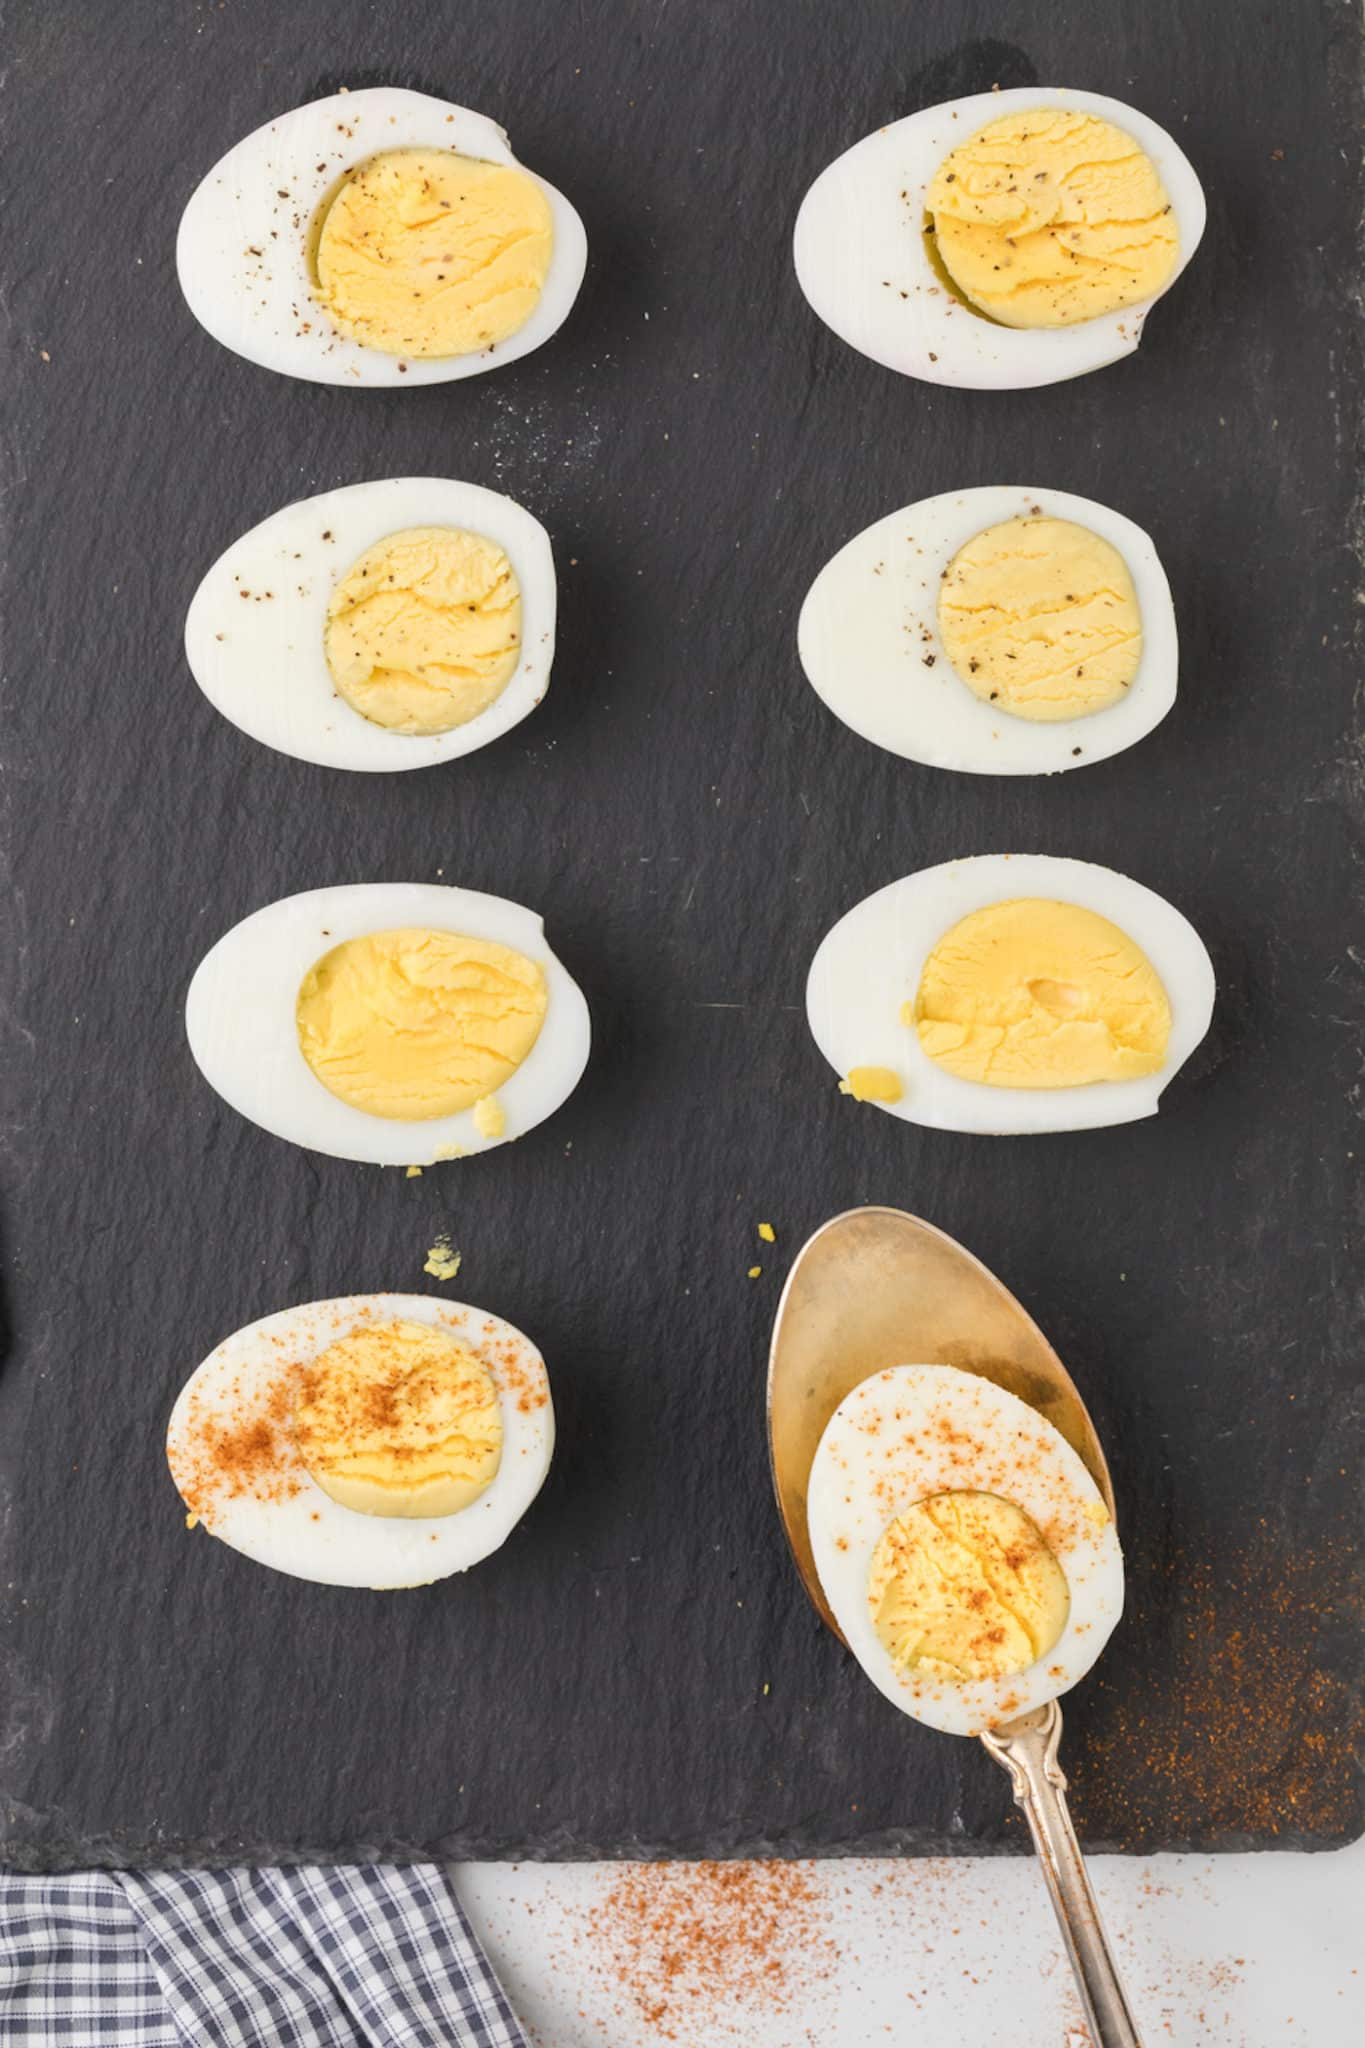 https://www.cleaneatingkitchen.com/wp-content/uploads/2022/01/cooked-eggs-on-slab-scaled.jpg